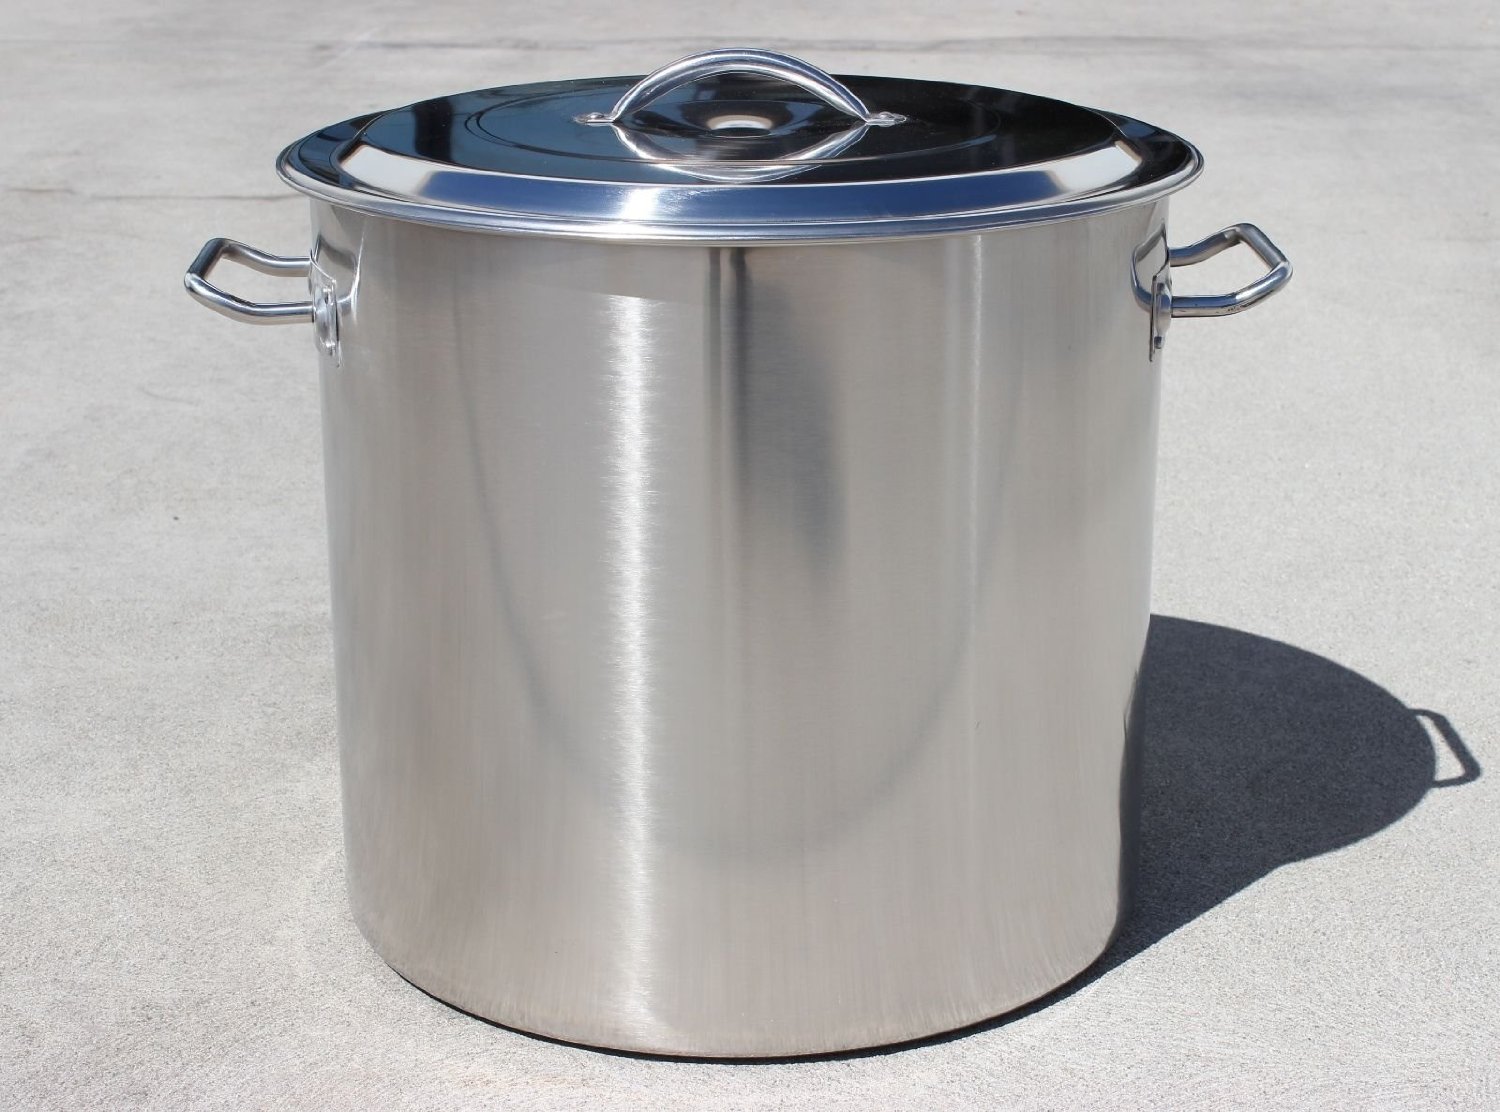 Concord Home Brew Stainless Steel Stock Pot Kettle (60 Quart)